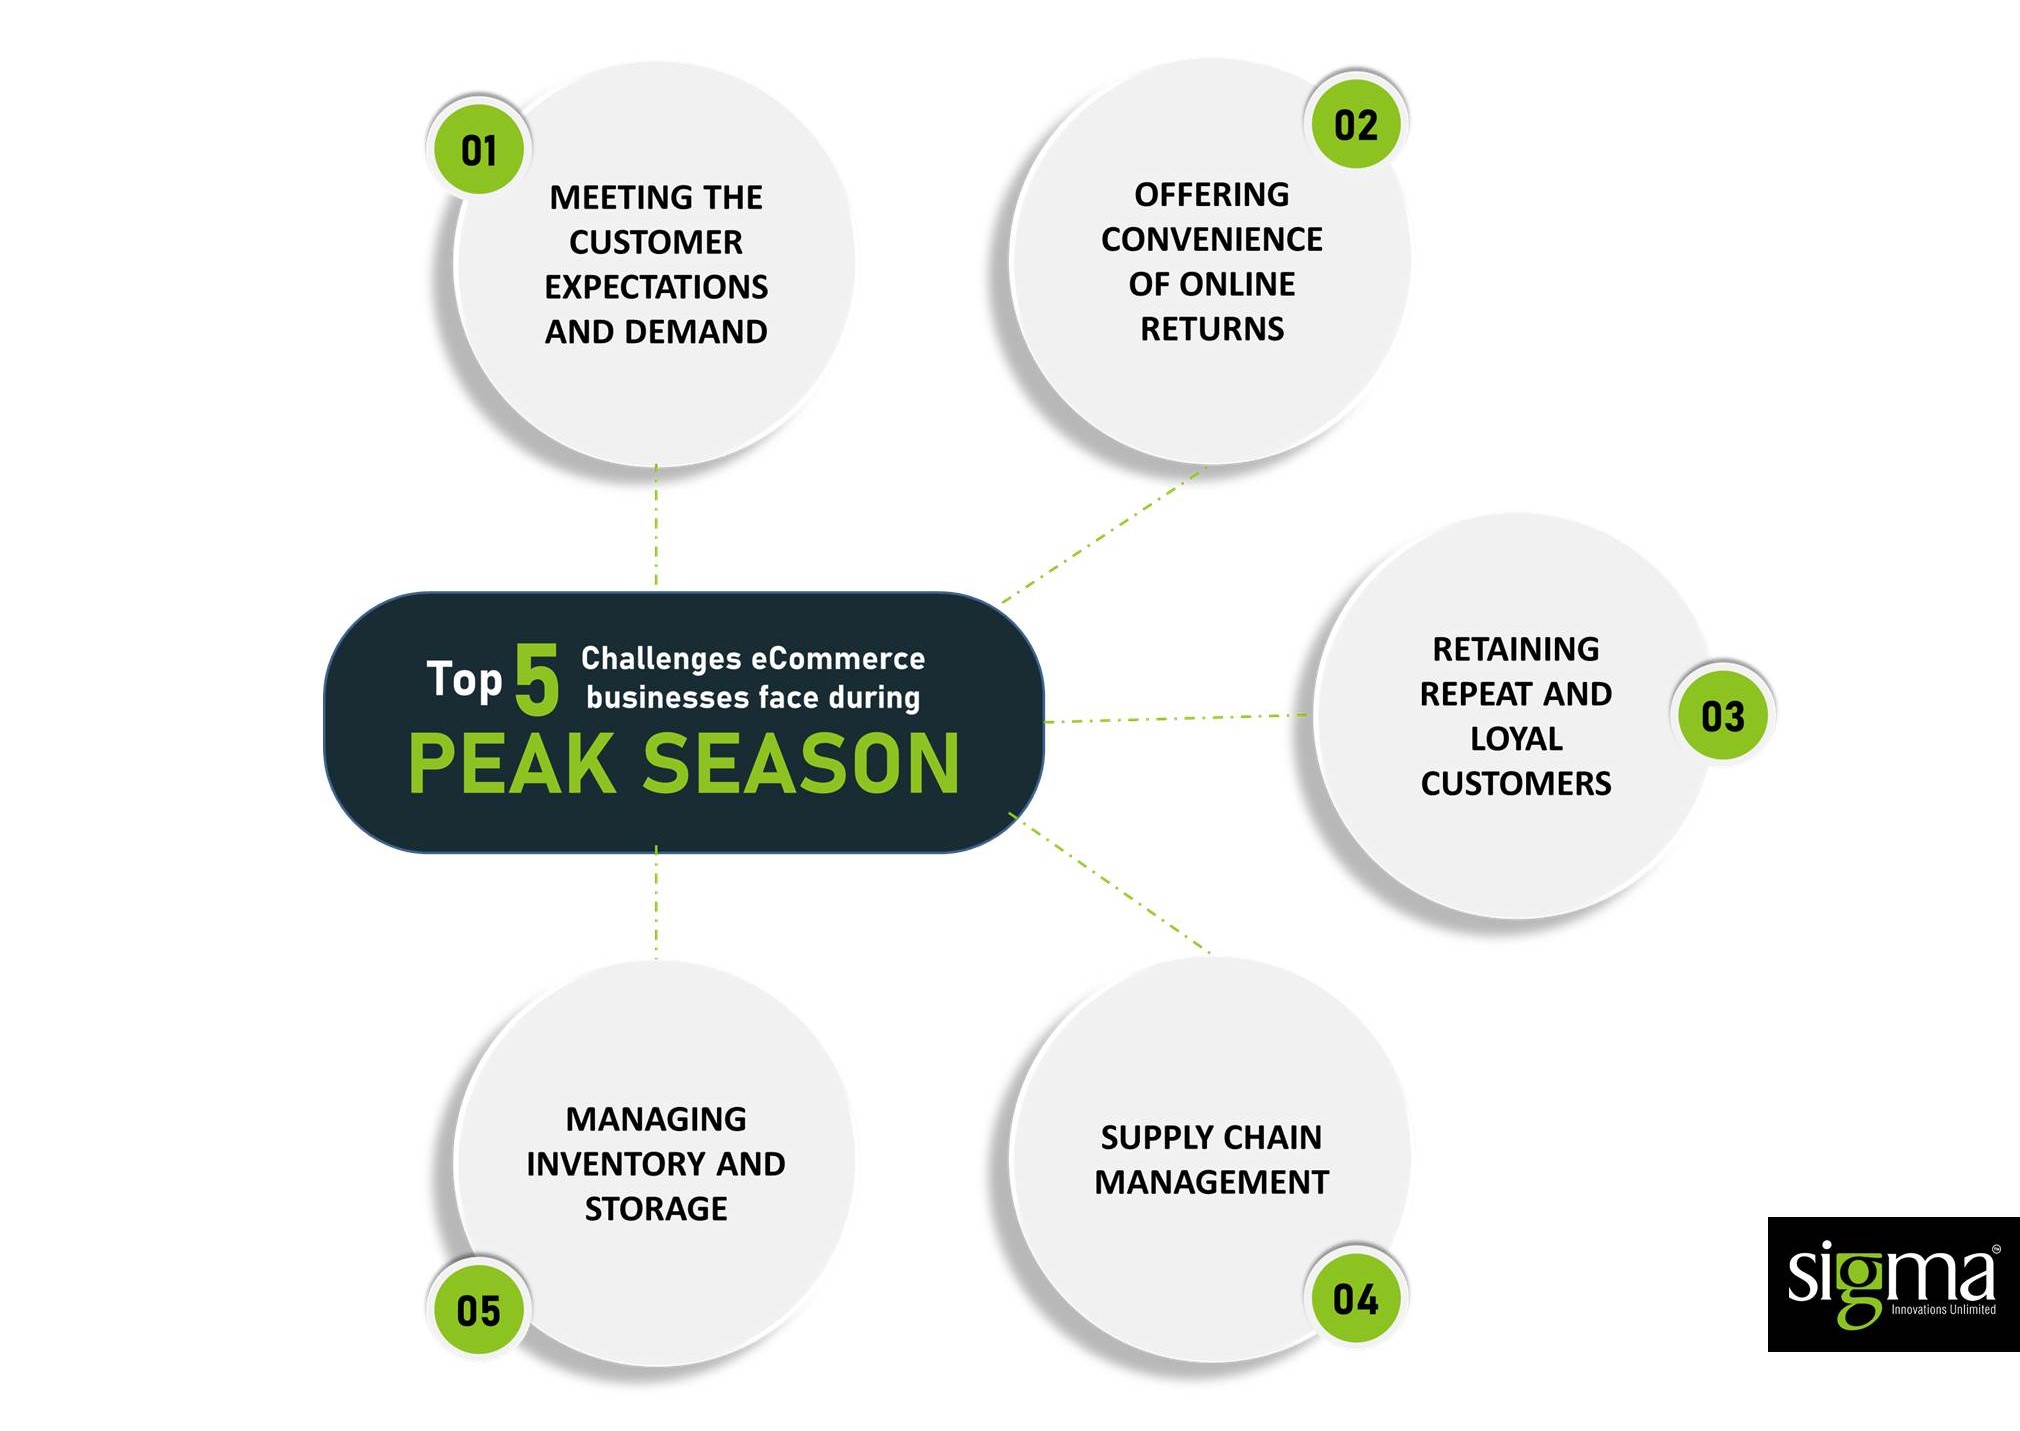 To 5 challenges ecommerce business face during peak season